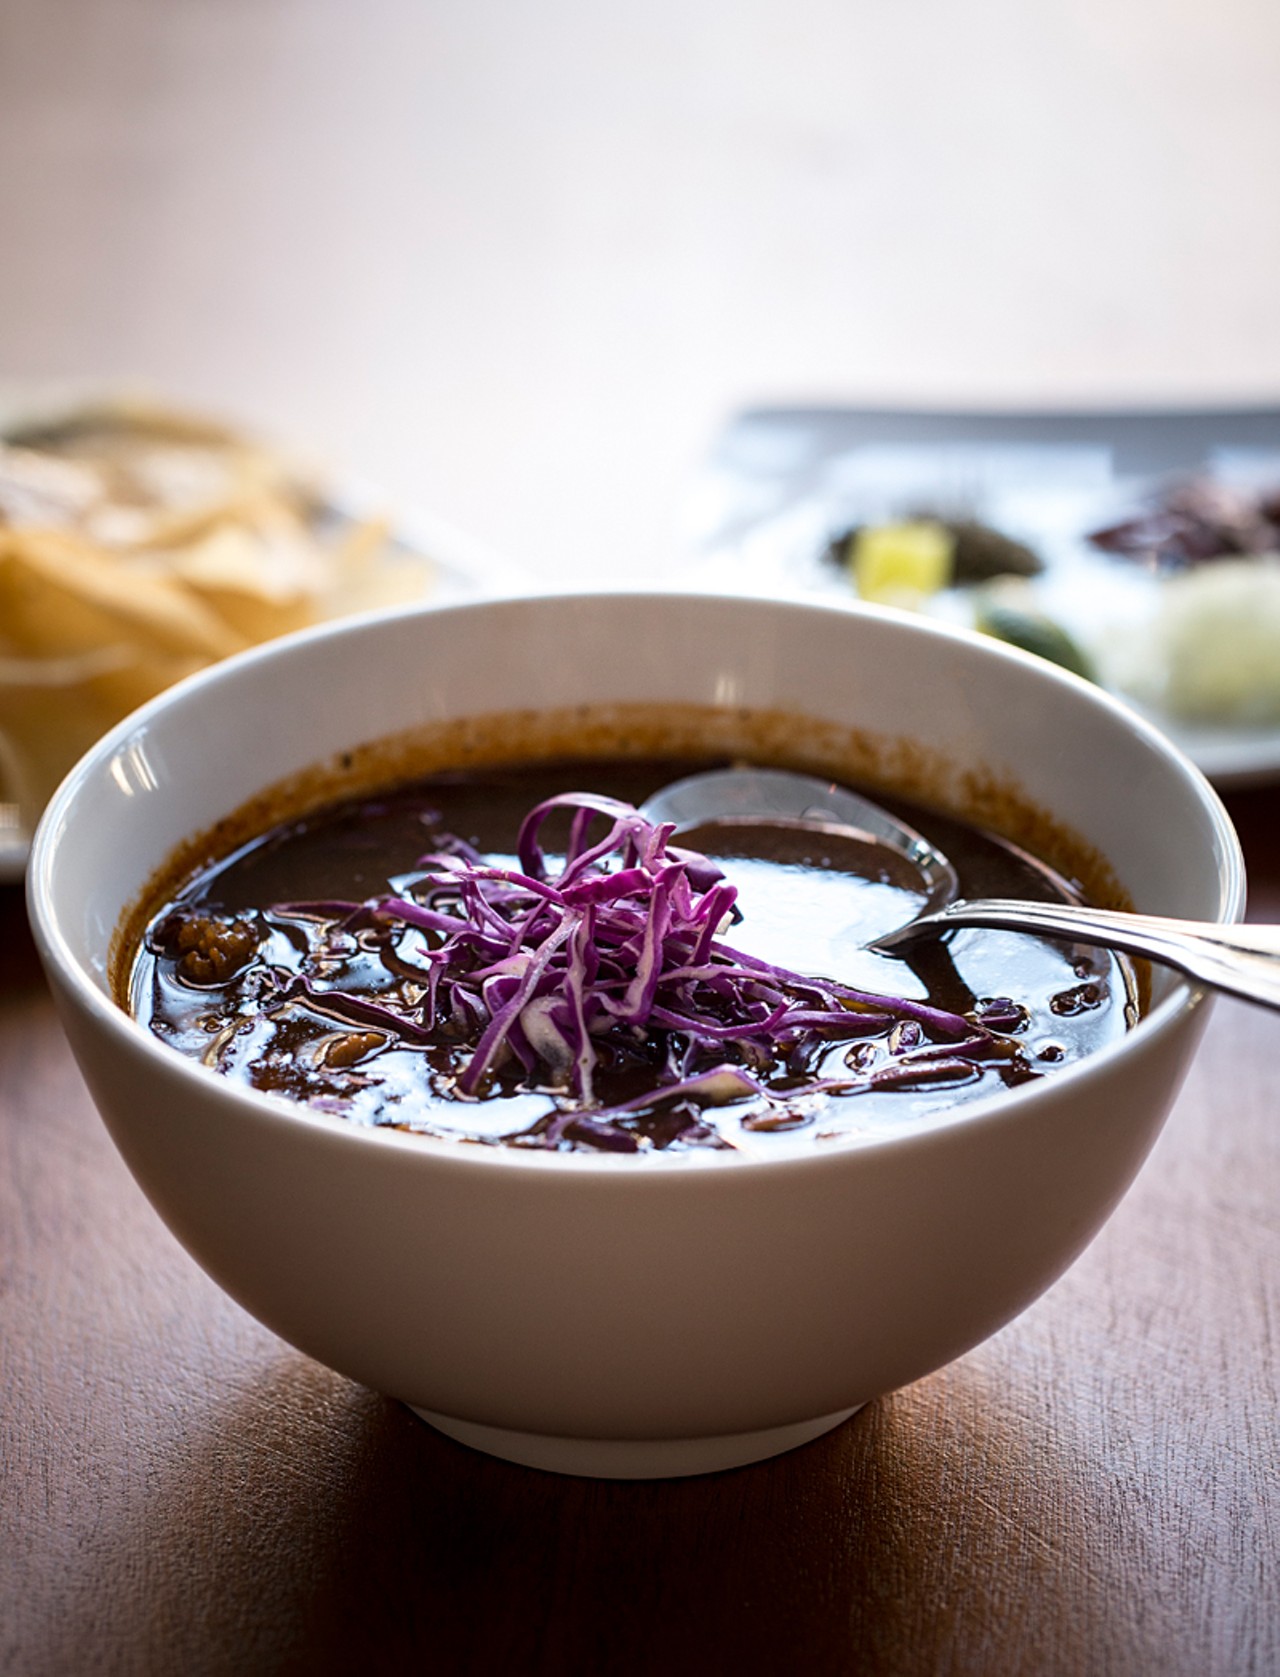 "Pozole Rojo" is a consomm&eacute; of arbol and ancho chiles served with crisped pulled pork, hominy and julienned cabbage.